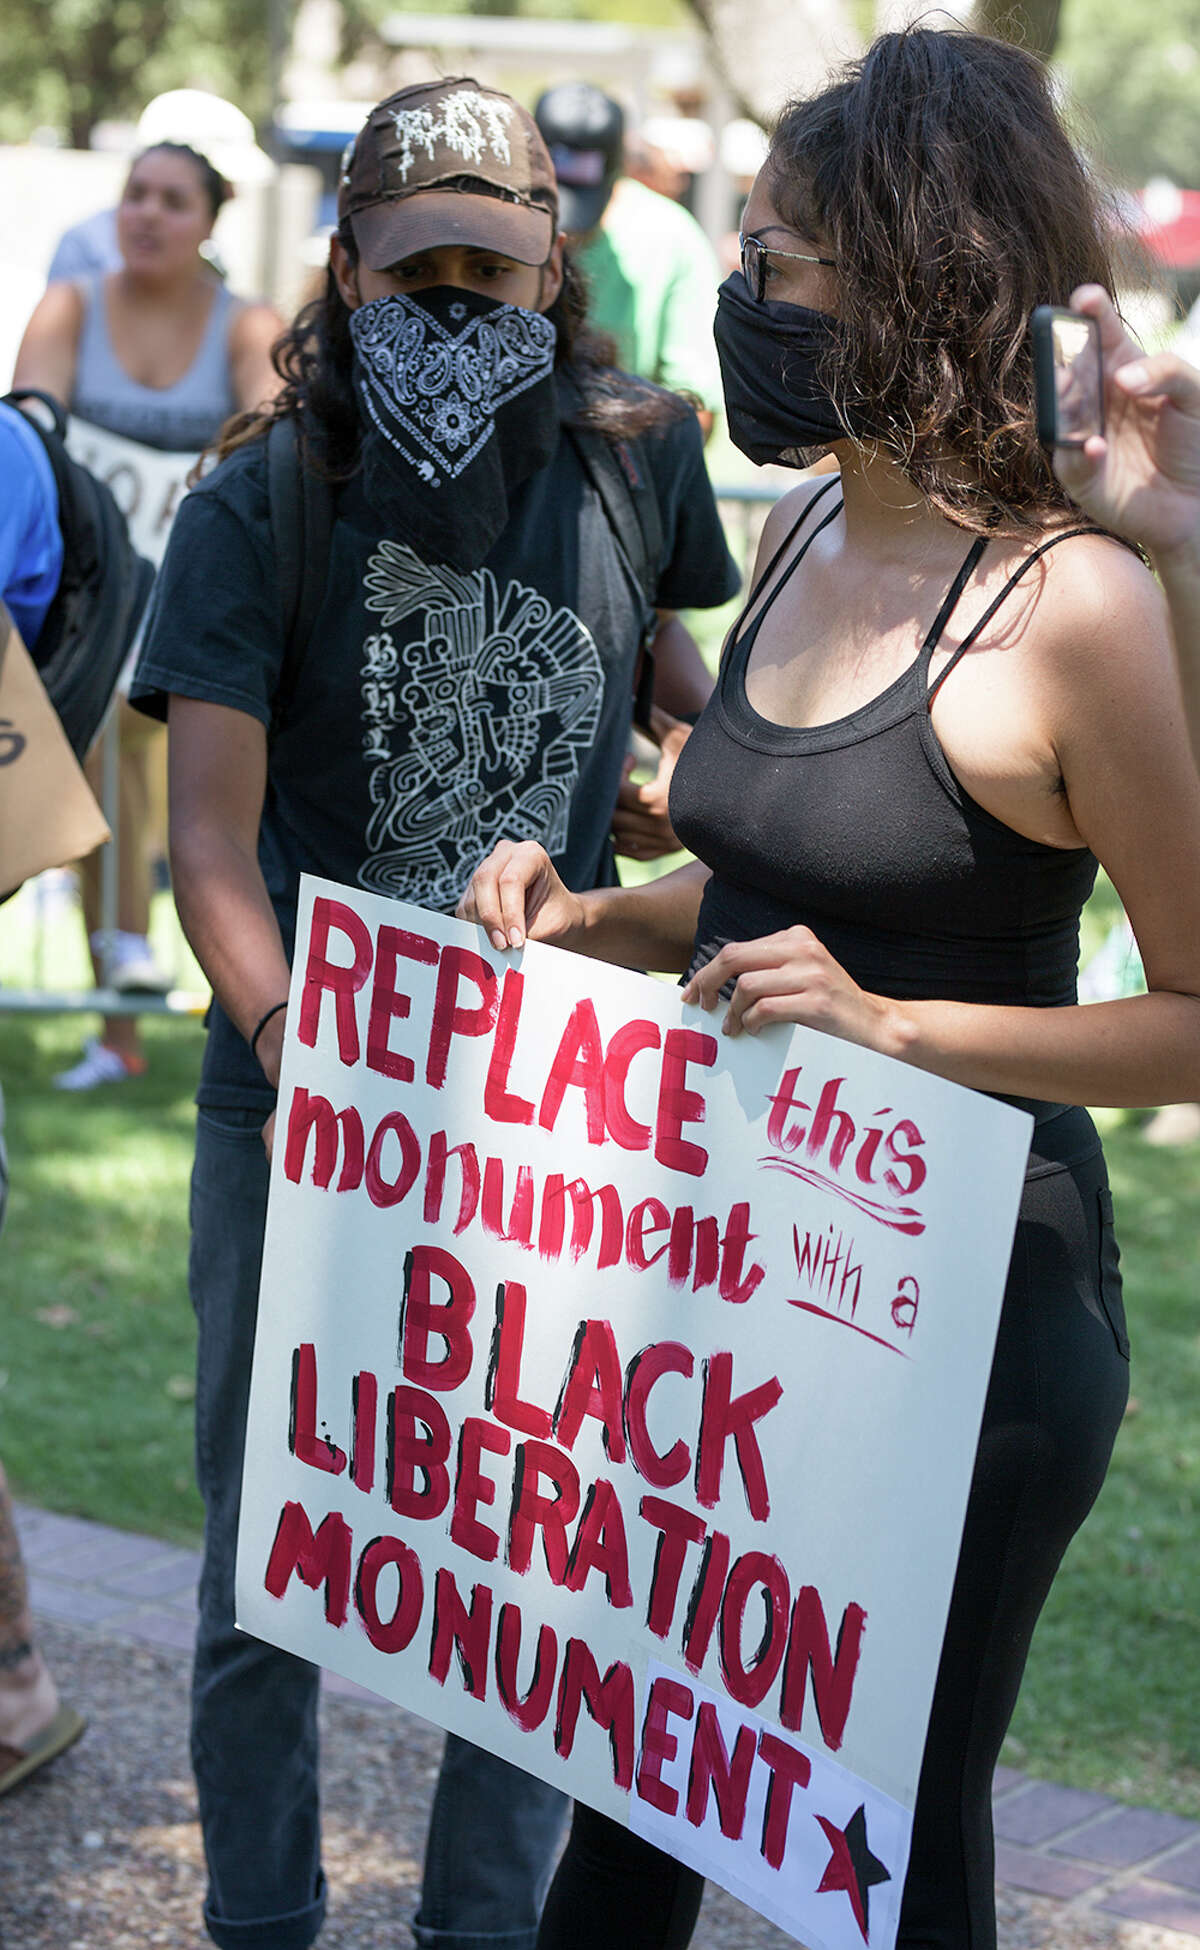 Two groups of protesters squared off in Travis Park Saturday Aug. 12, 2012, over a statue honoring Confederate dead.